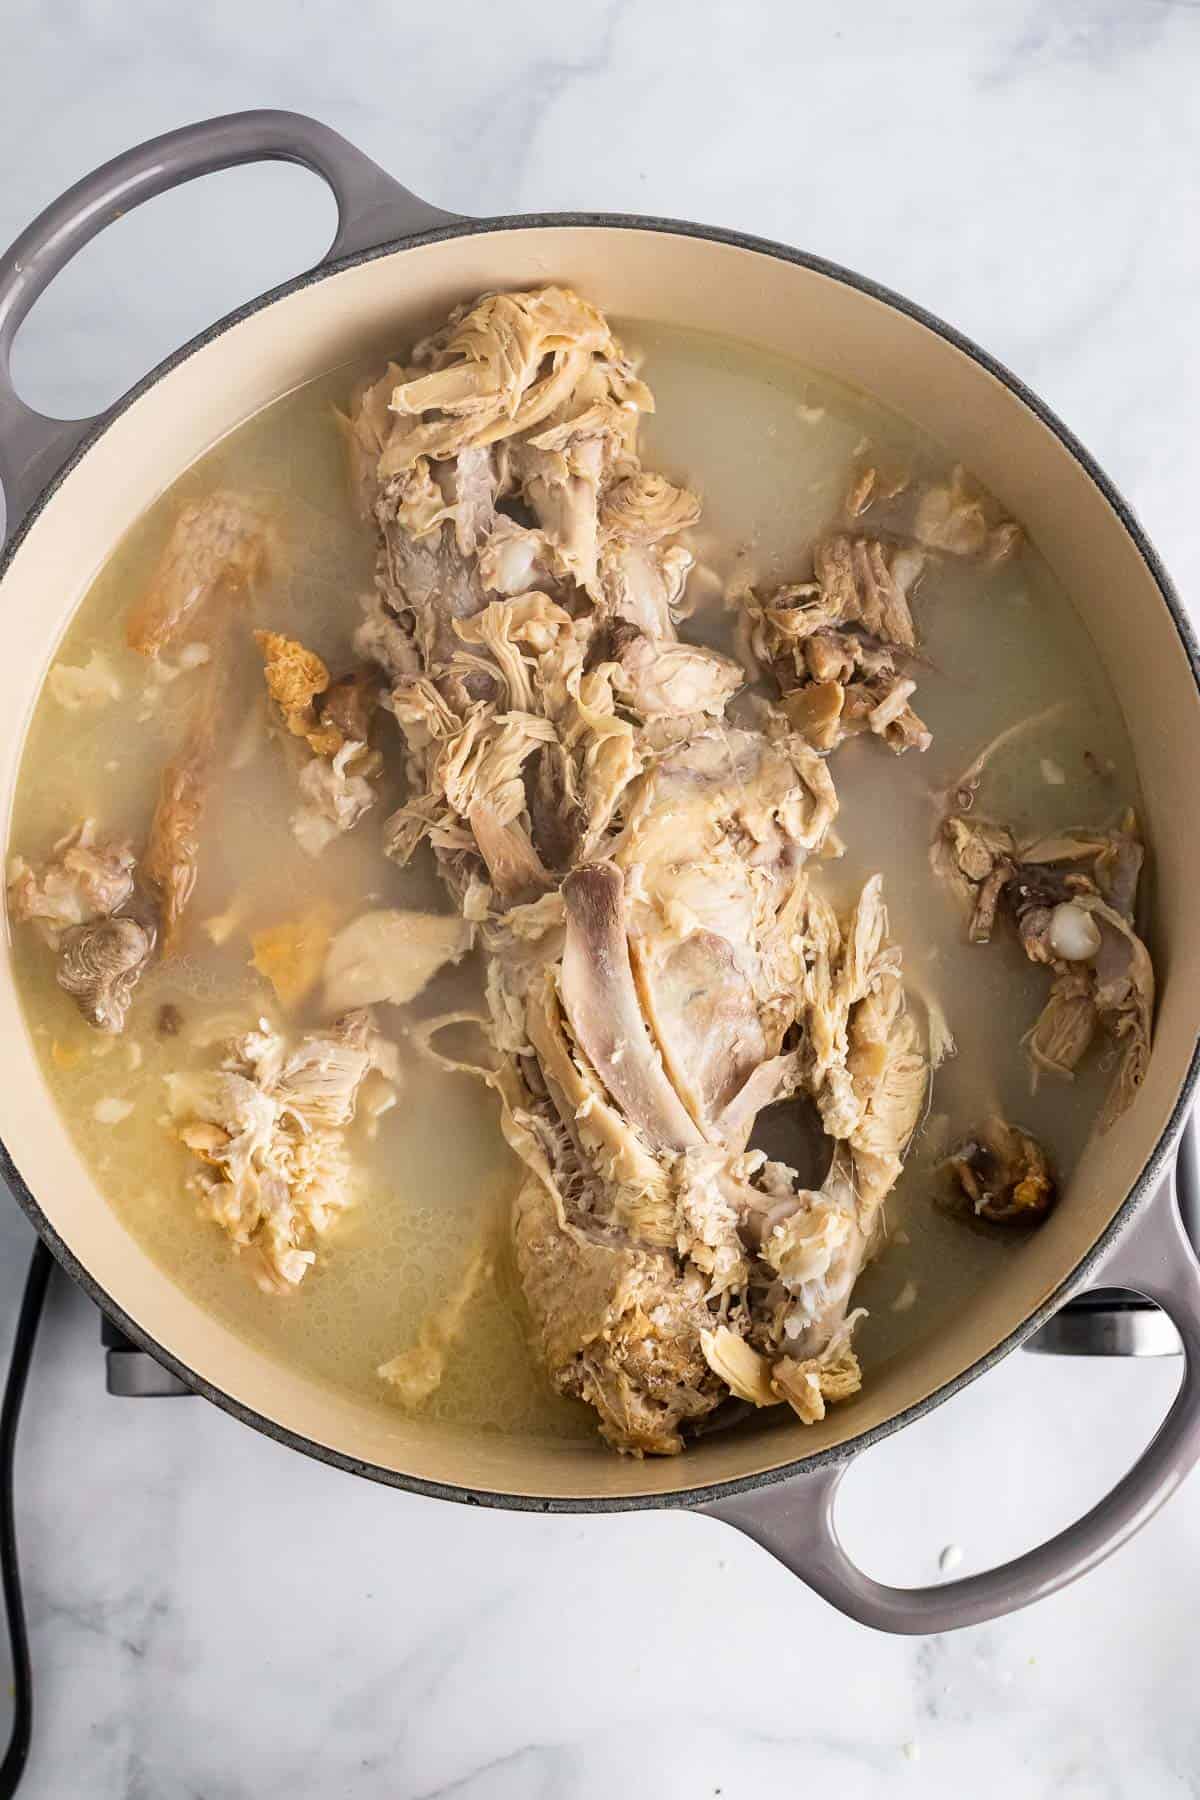 Turkey carcass cooking in pot